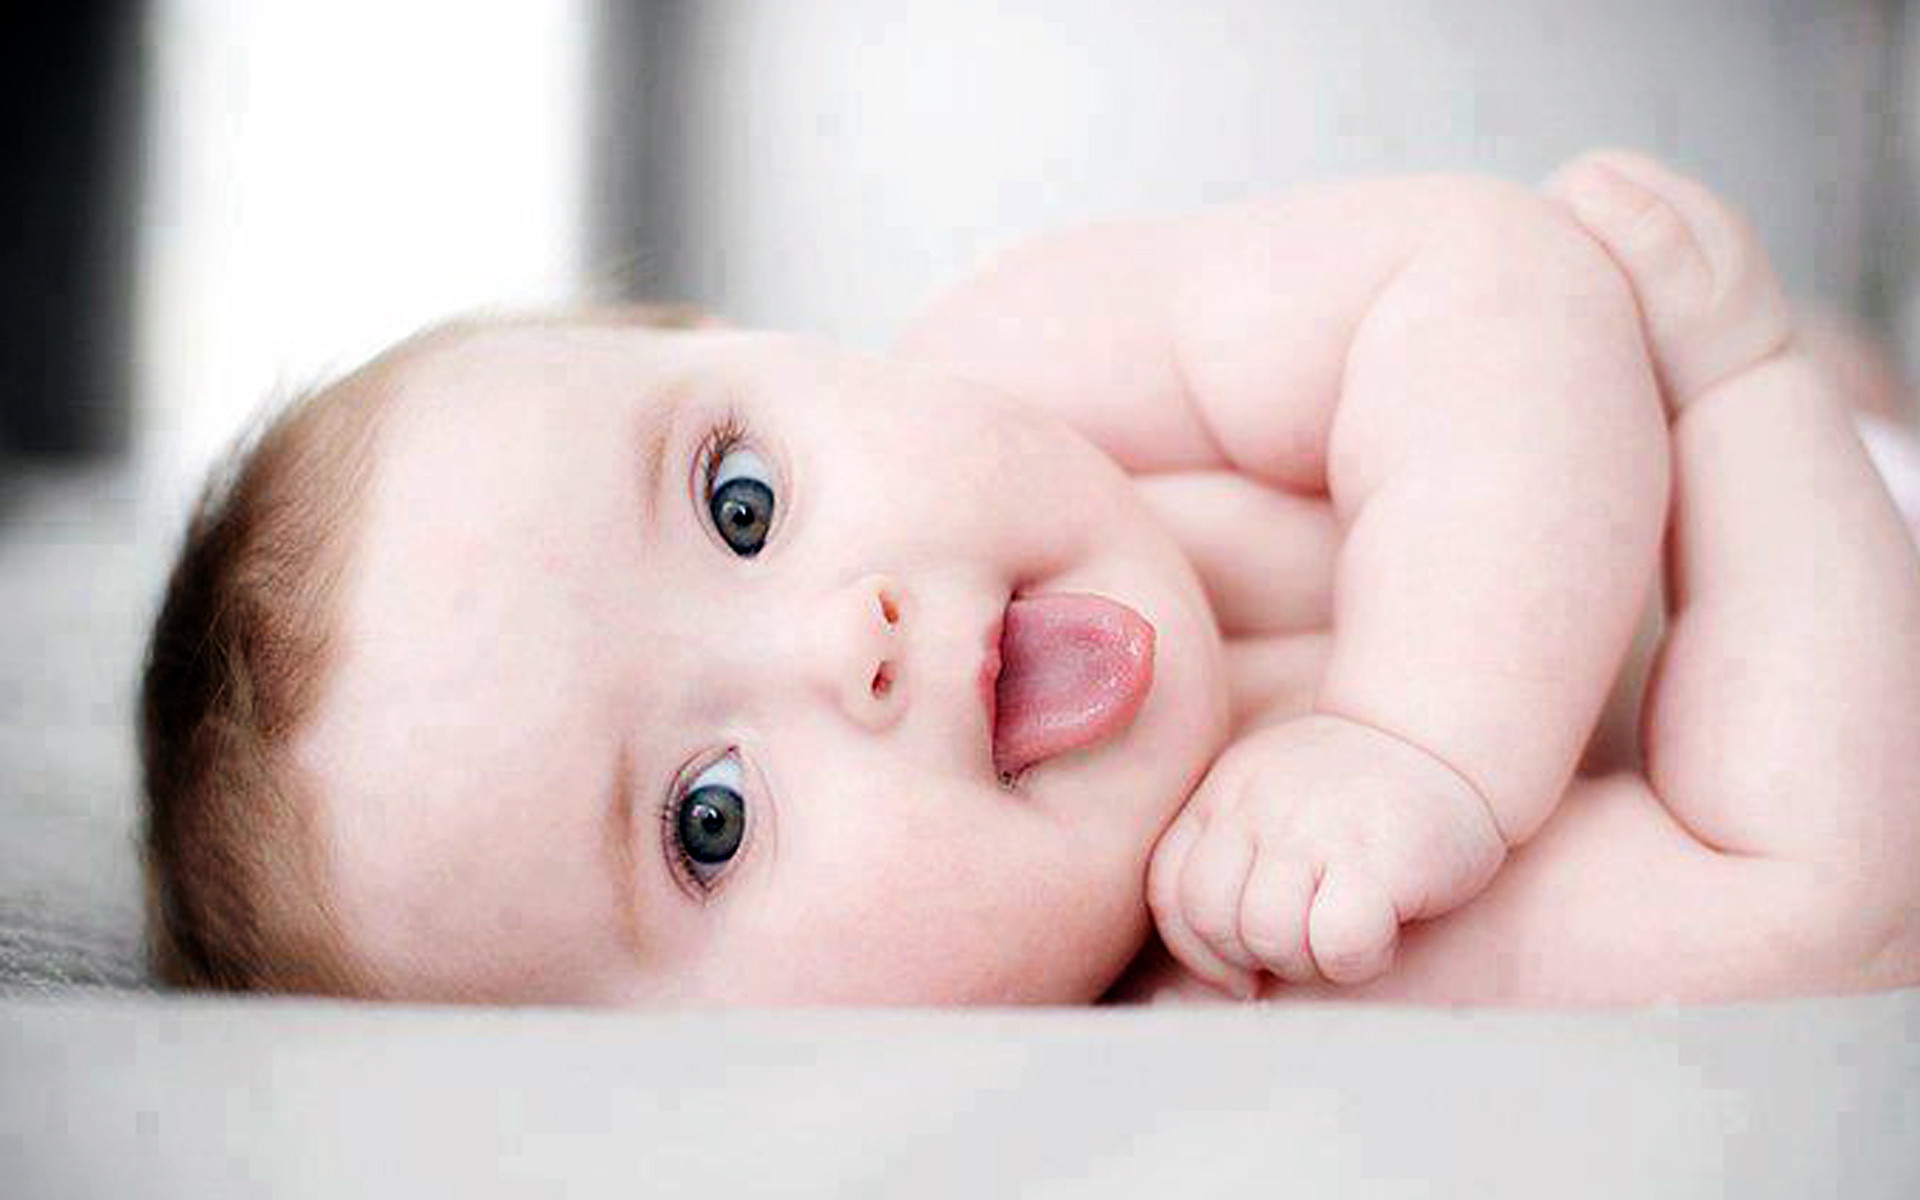 Cute Baby Boy Pics Group With 45 Items Striking Very Images | ohidul.me